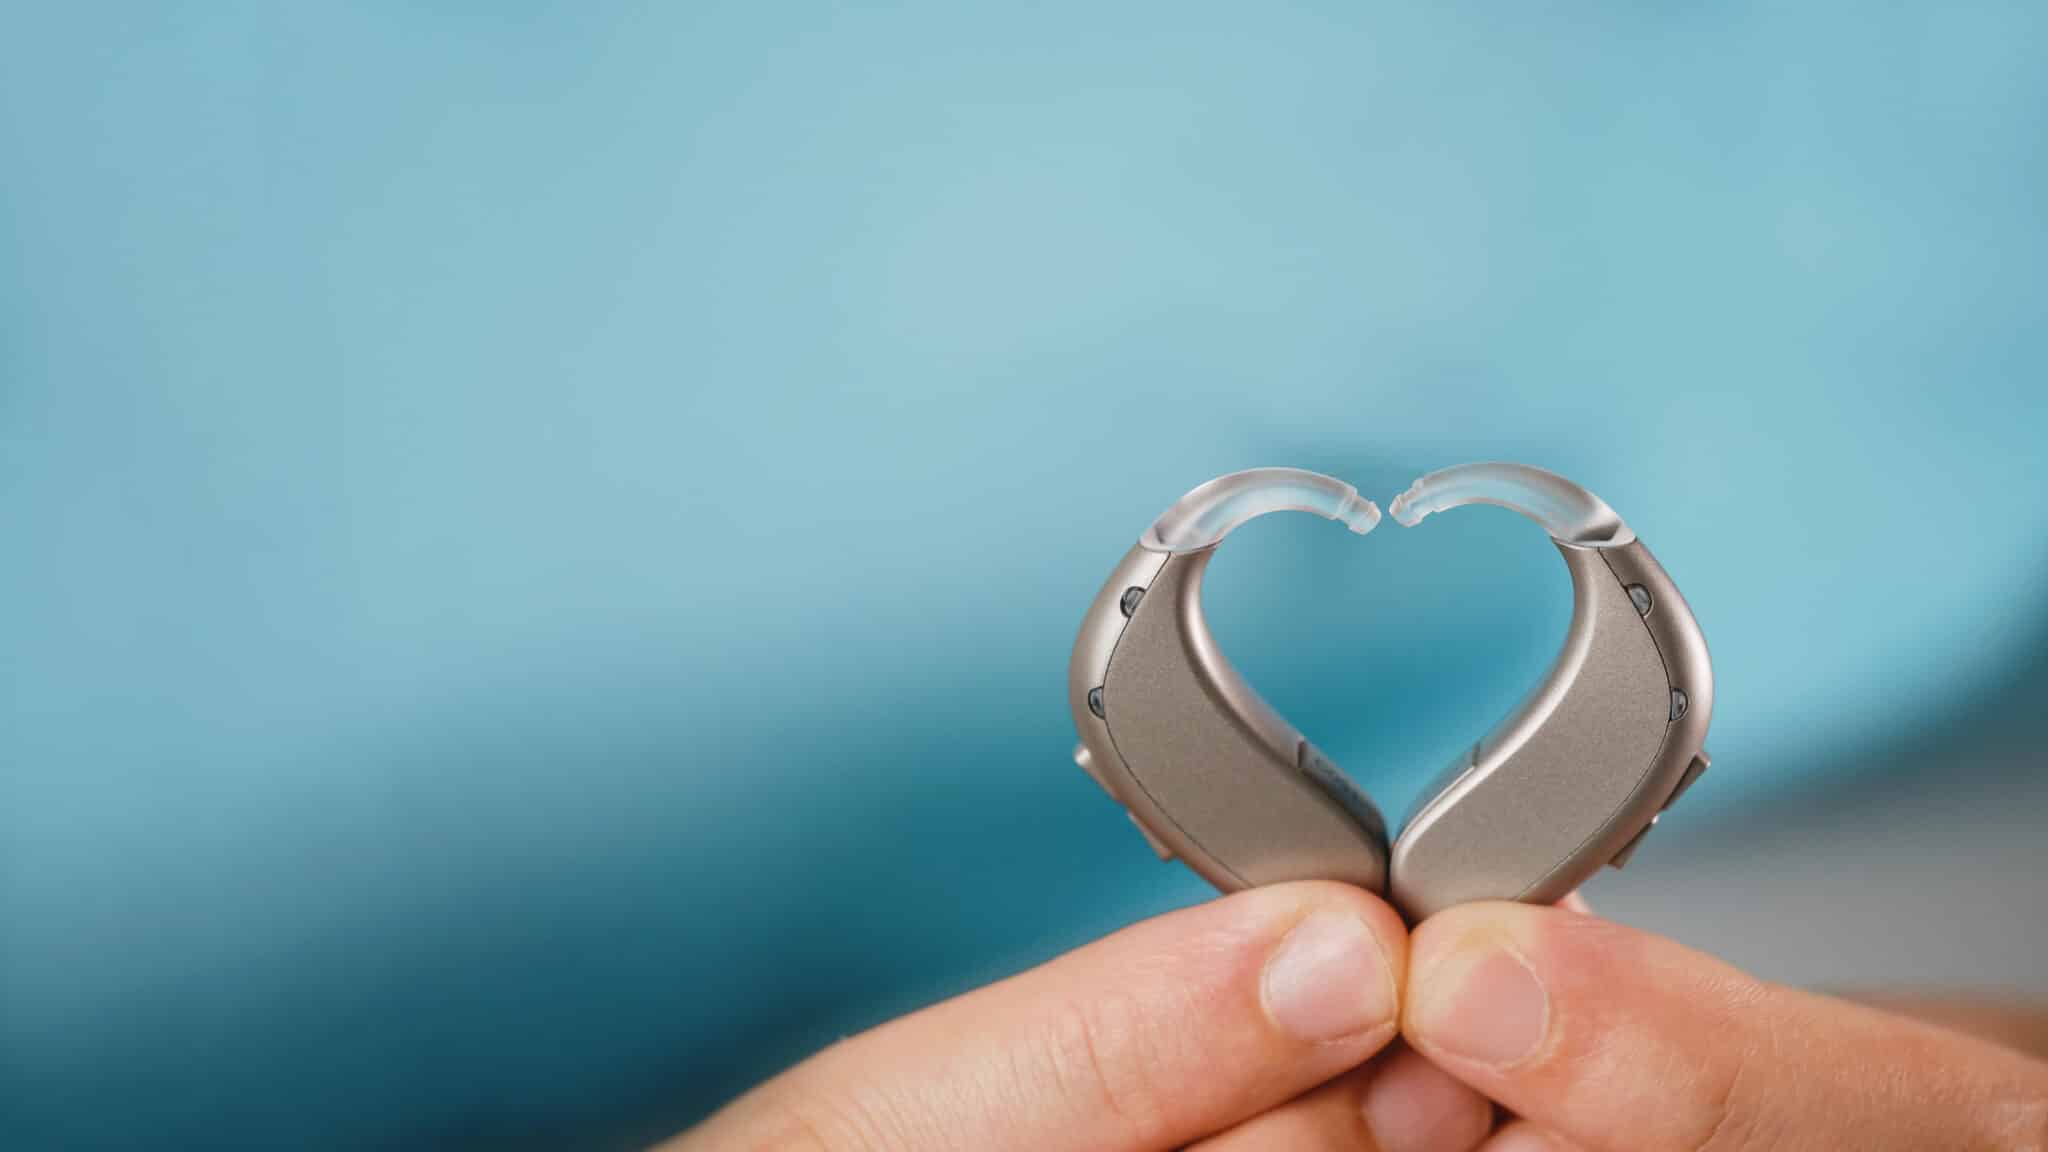 Fingers pressing a pair of hearing aids together in the shape of a heart